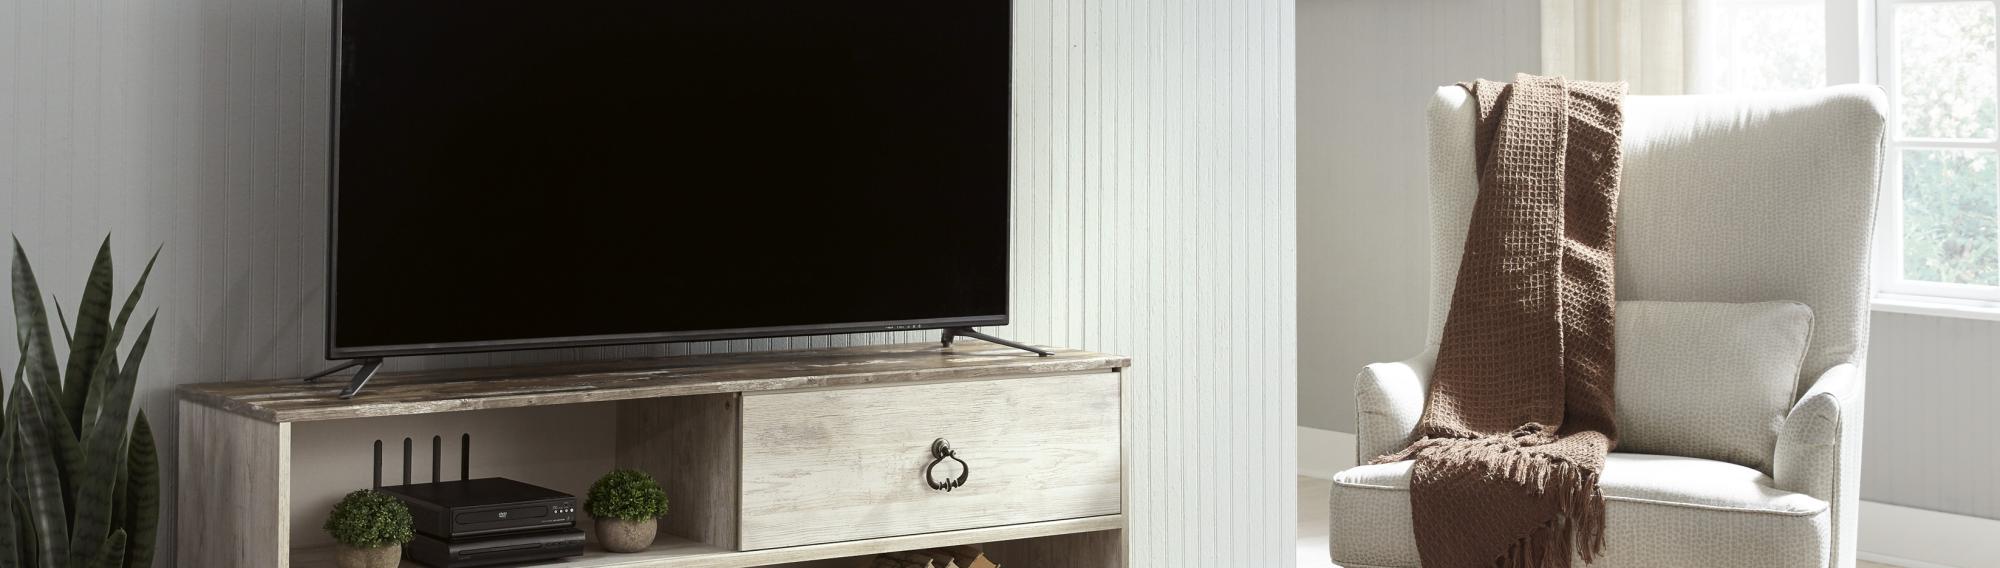 Image of an affordable entertainment console